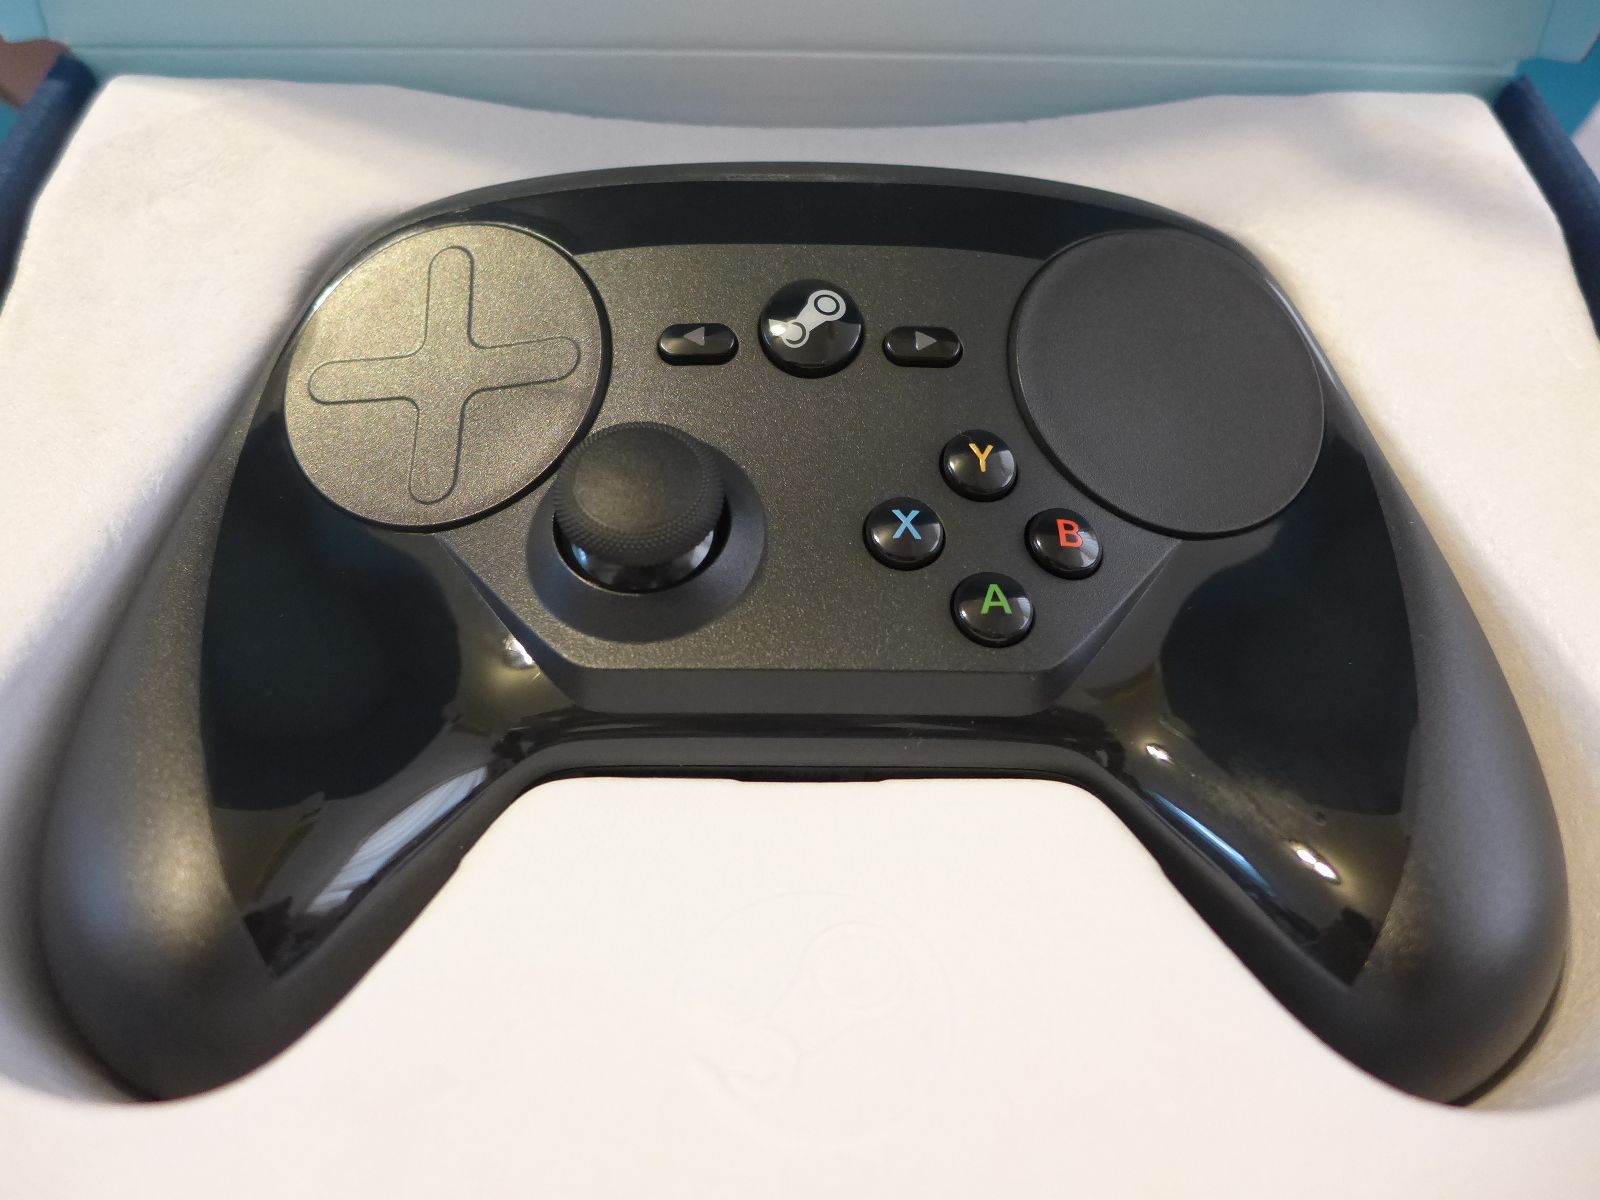 An image of the Steam Controller